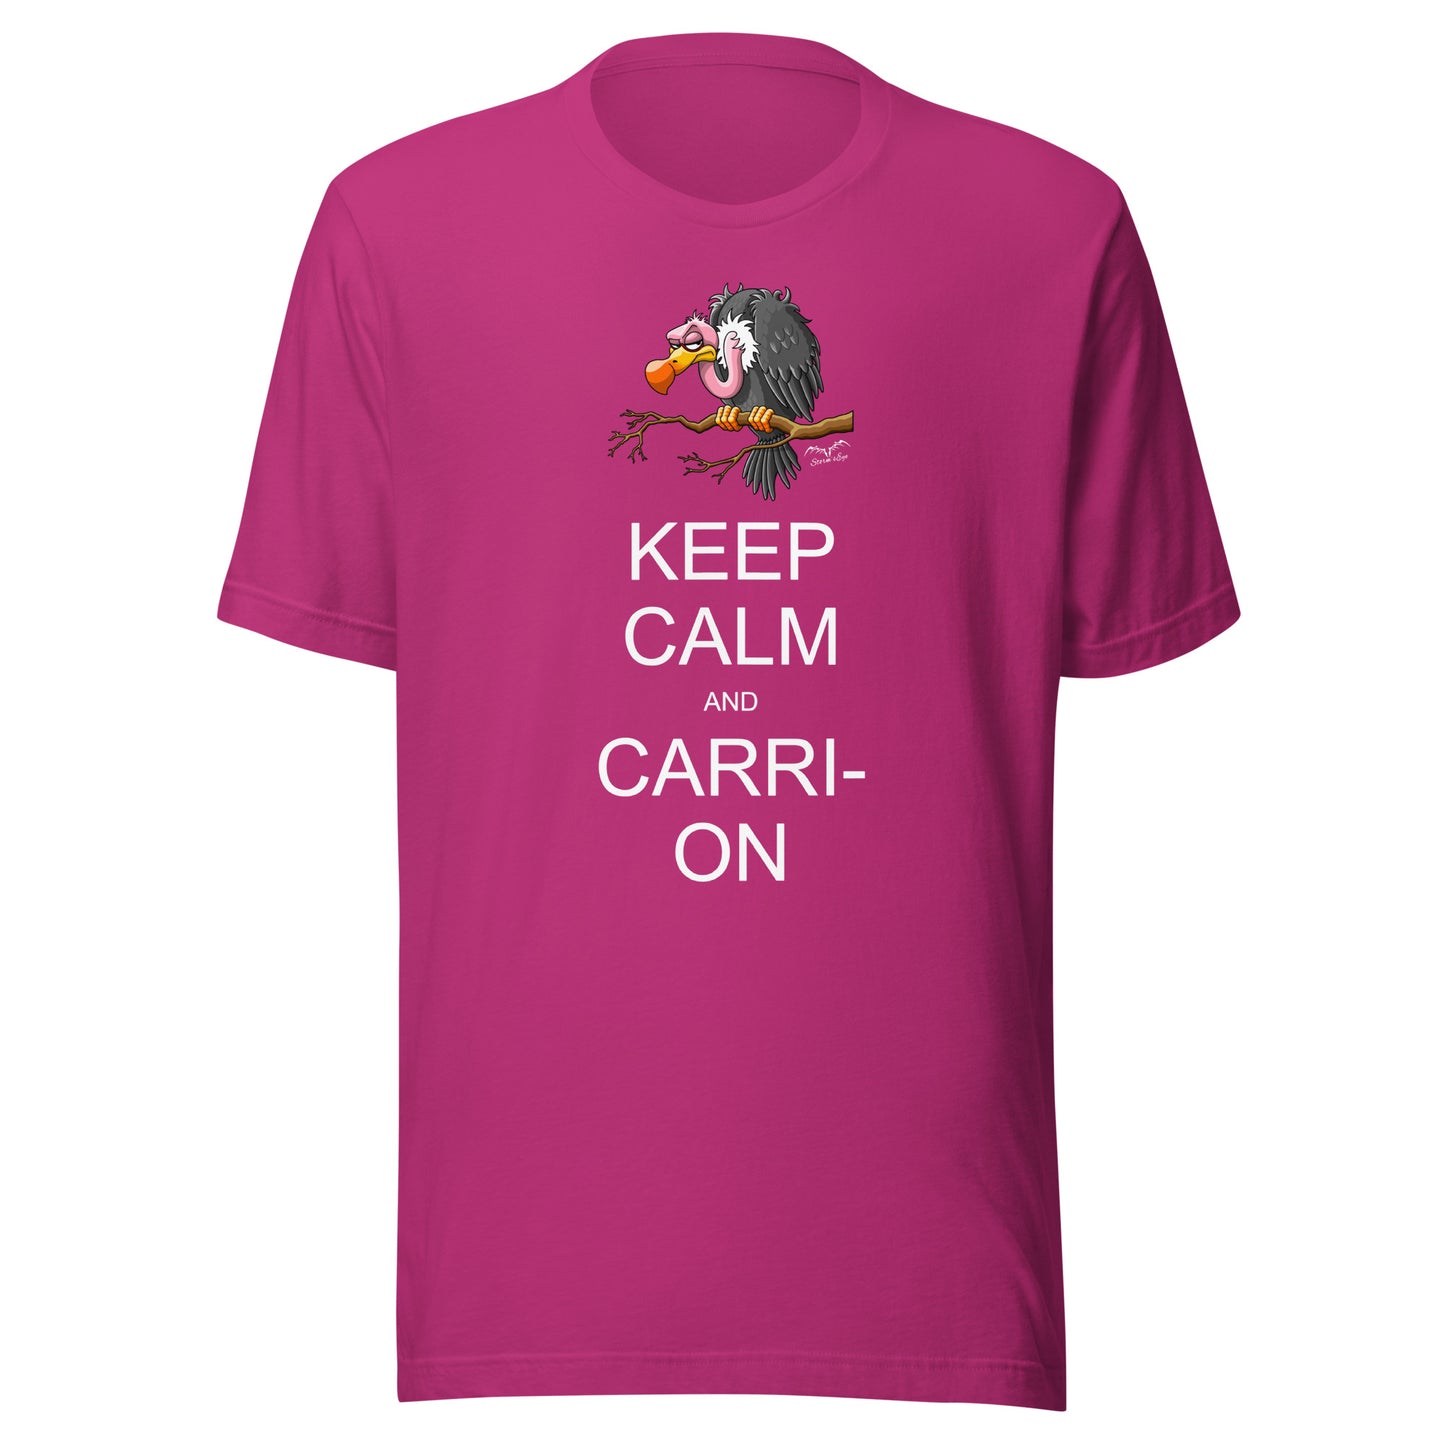 keep calm and carrion vulture t-shirt bright pink by stormseye design